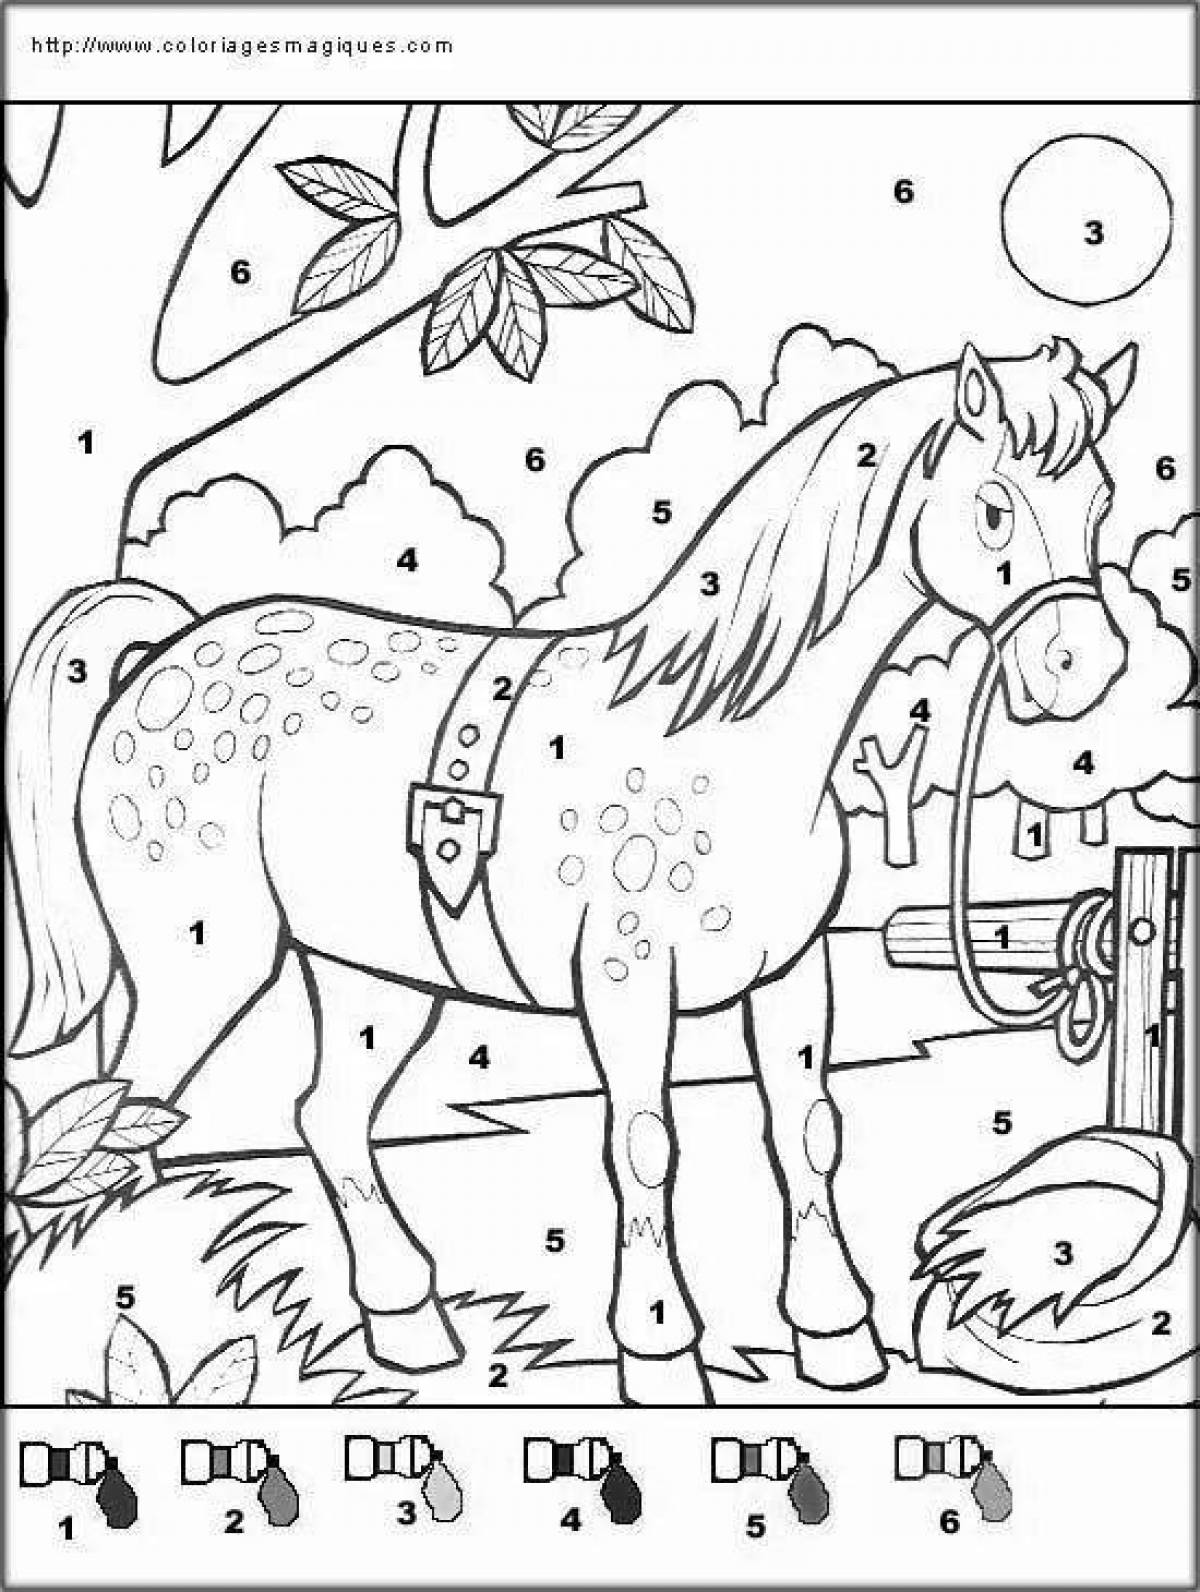 Awesome horse coloring by numbers